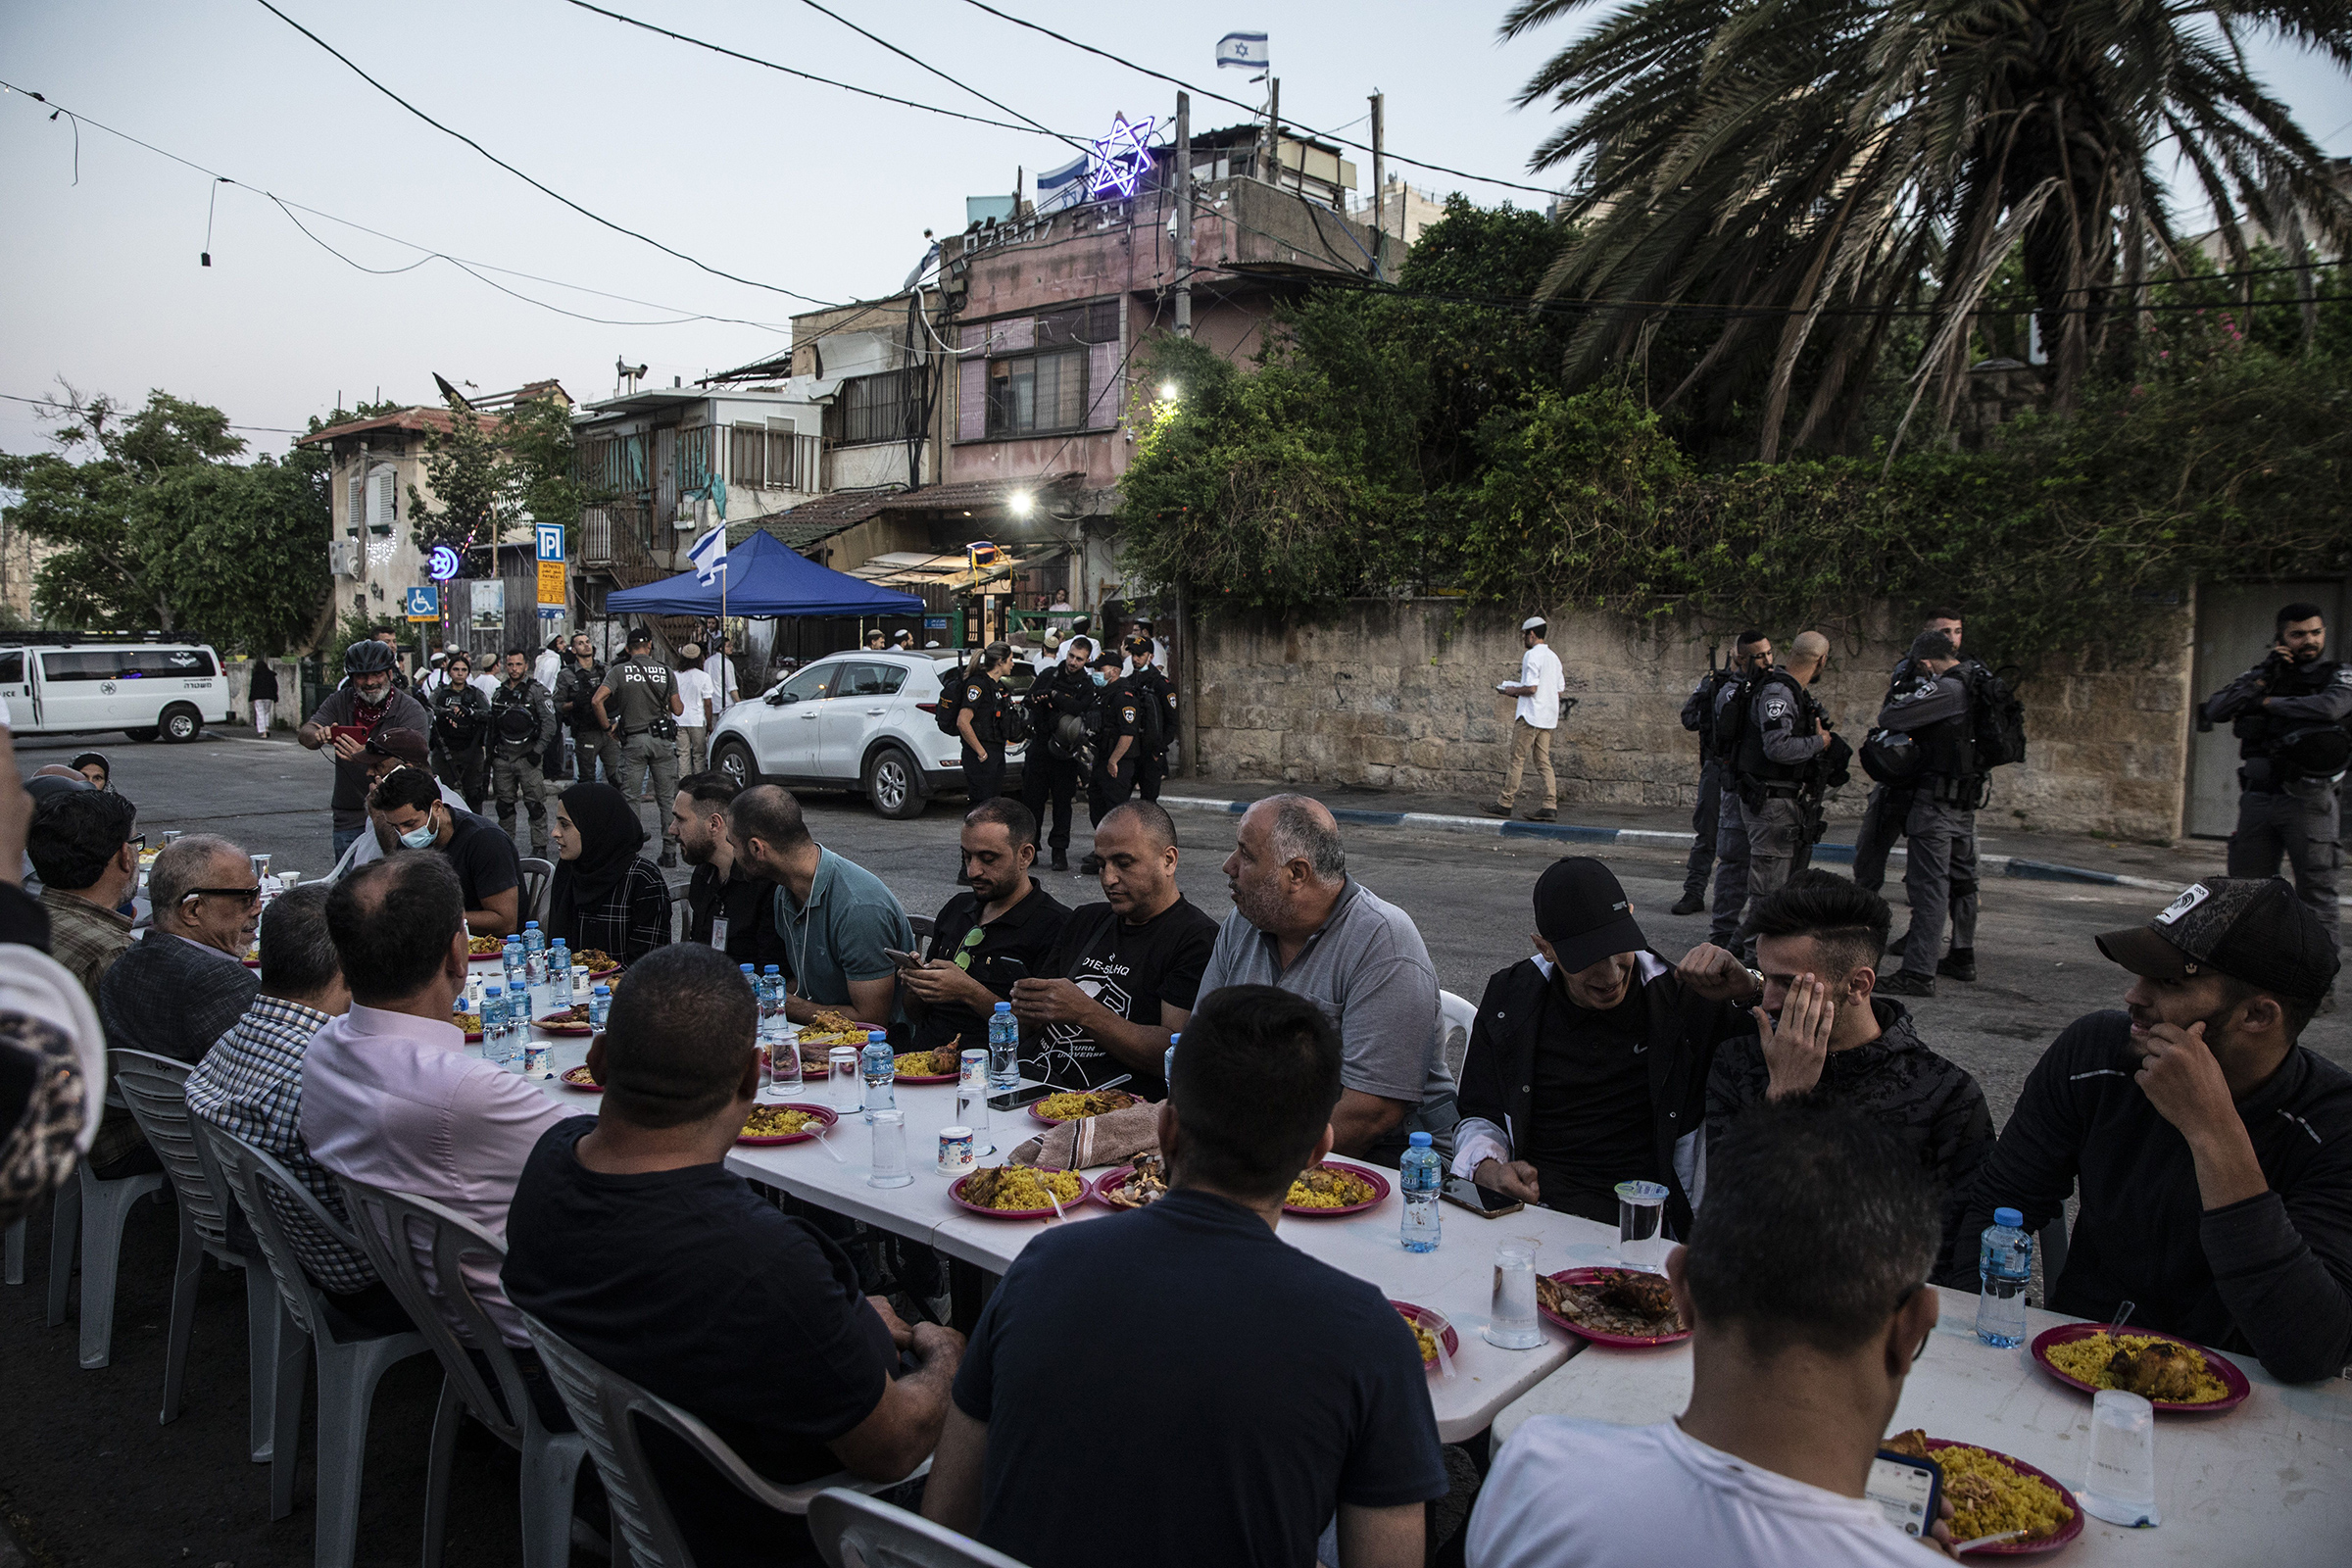 Palestinians sit at a large table to break the fast during Ramadan as Israeli border police guard Jewish settlers, outside one of the homes they have taken over from a Palestinian family and near other homes of Palestinians facing eviction, in the East Jerusalem neighborhood of Sheikh Jarrah on May 7, 2021. (Heidi Levine—Sipa USA)